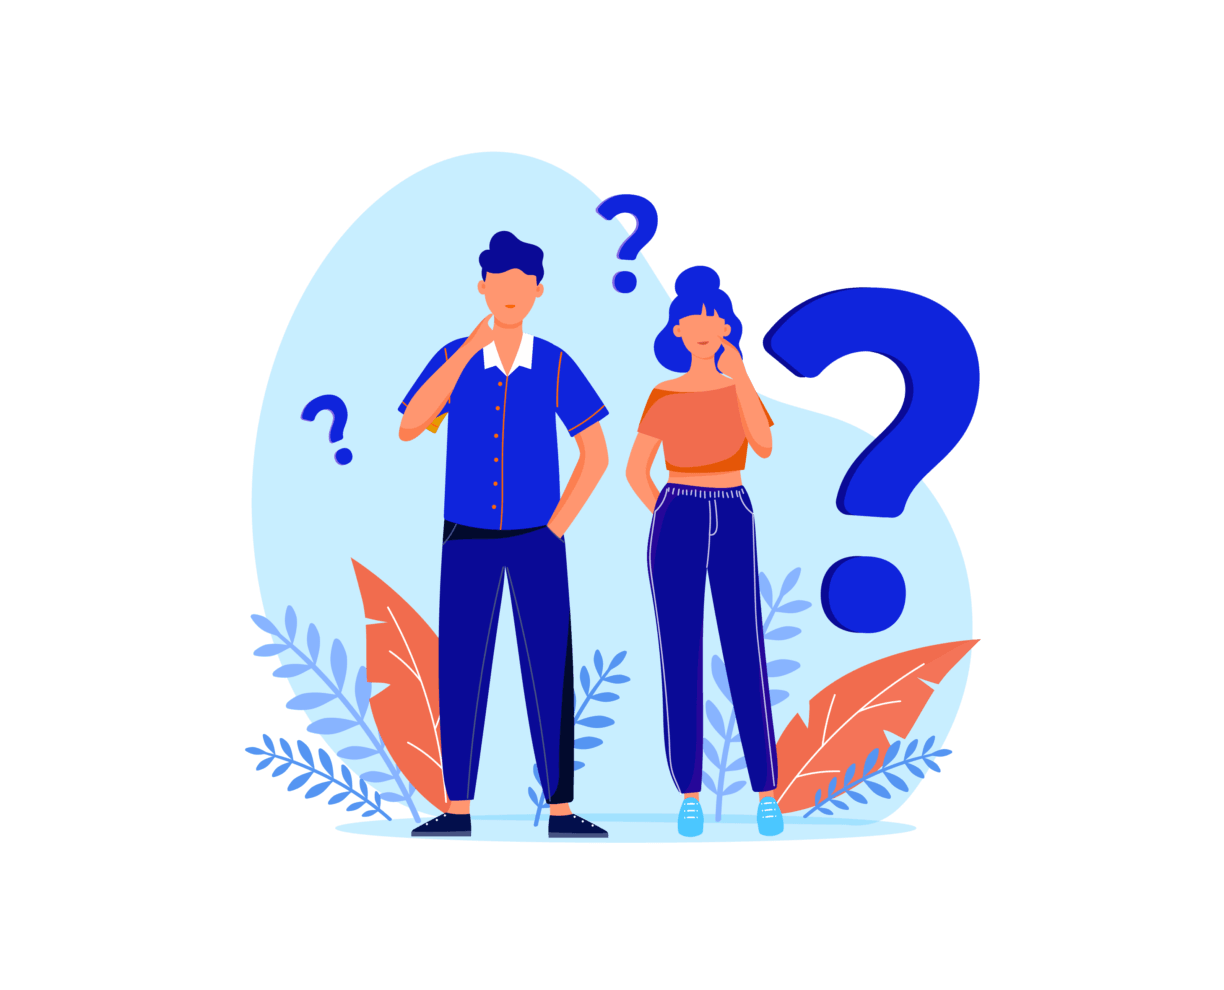 Illustration of two people thinking